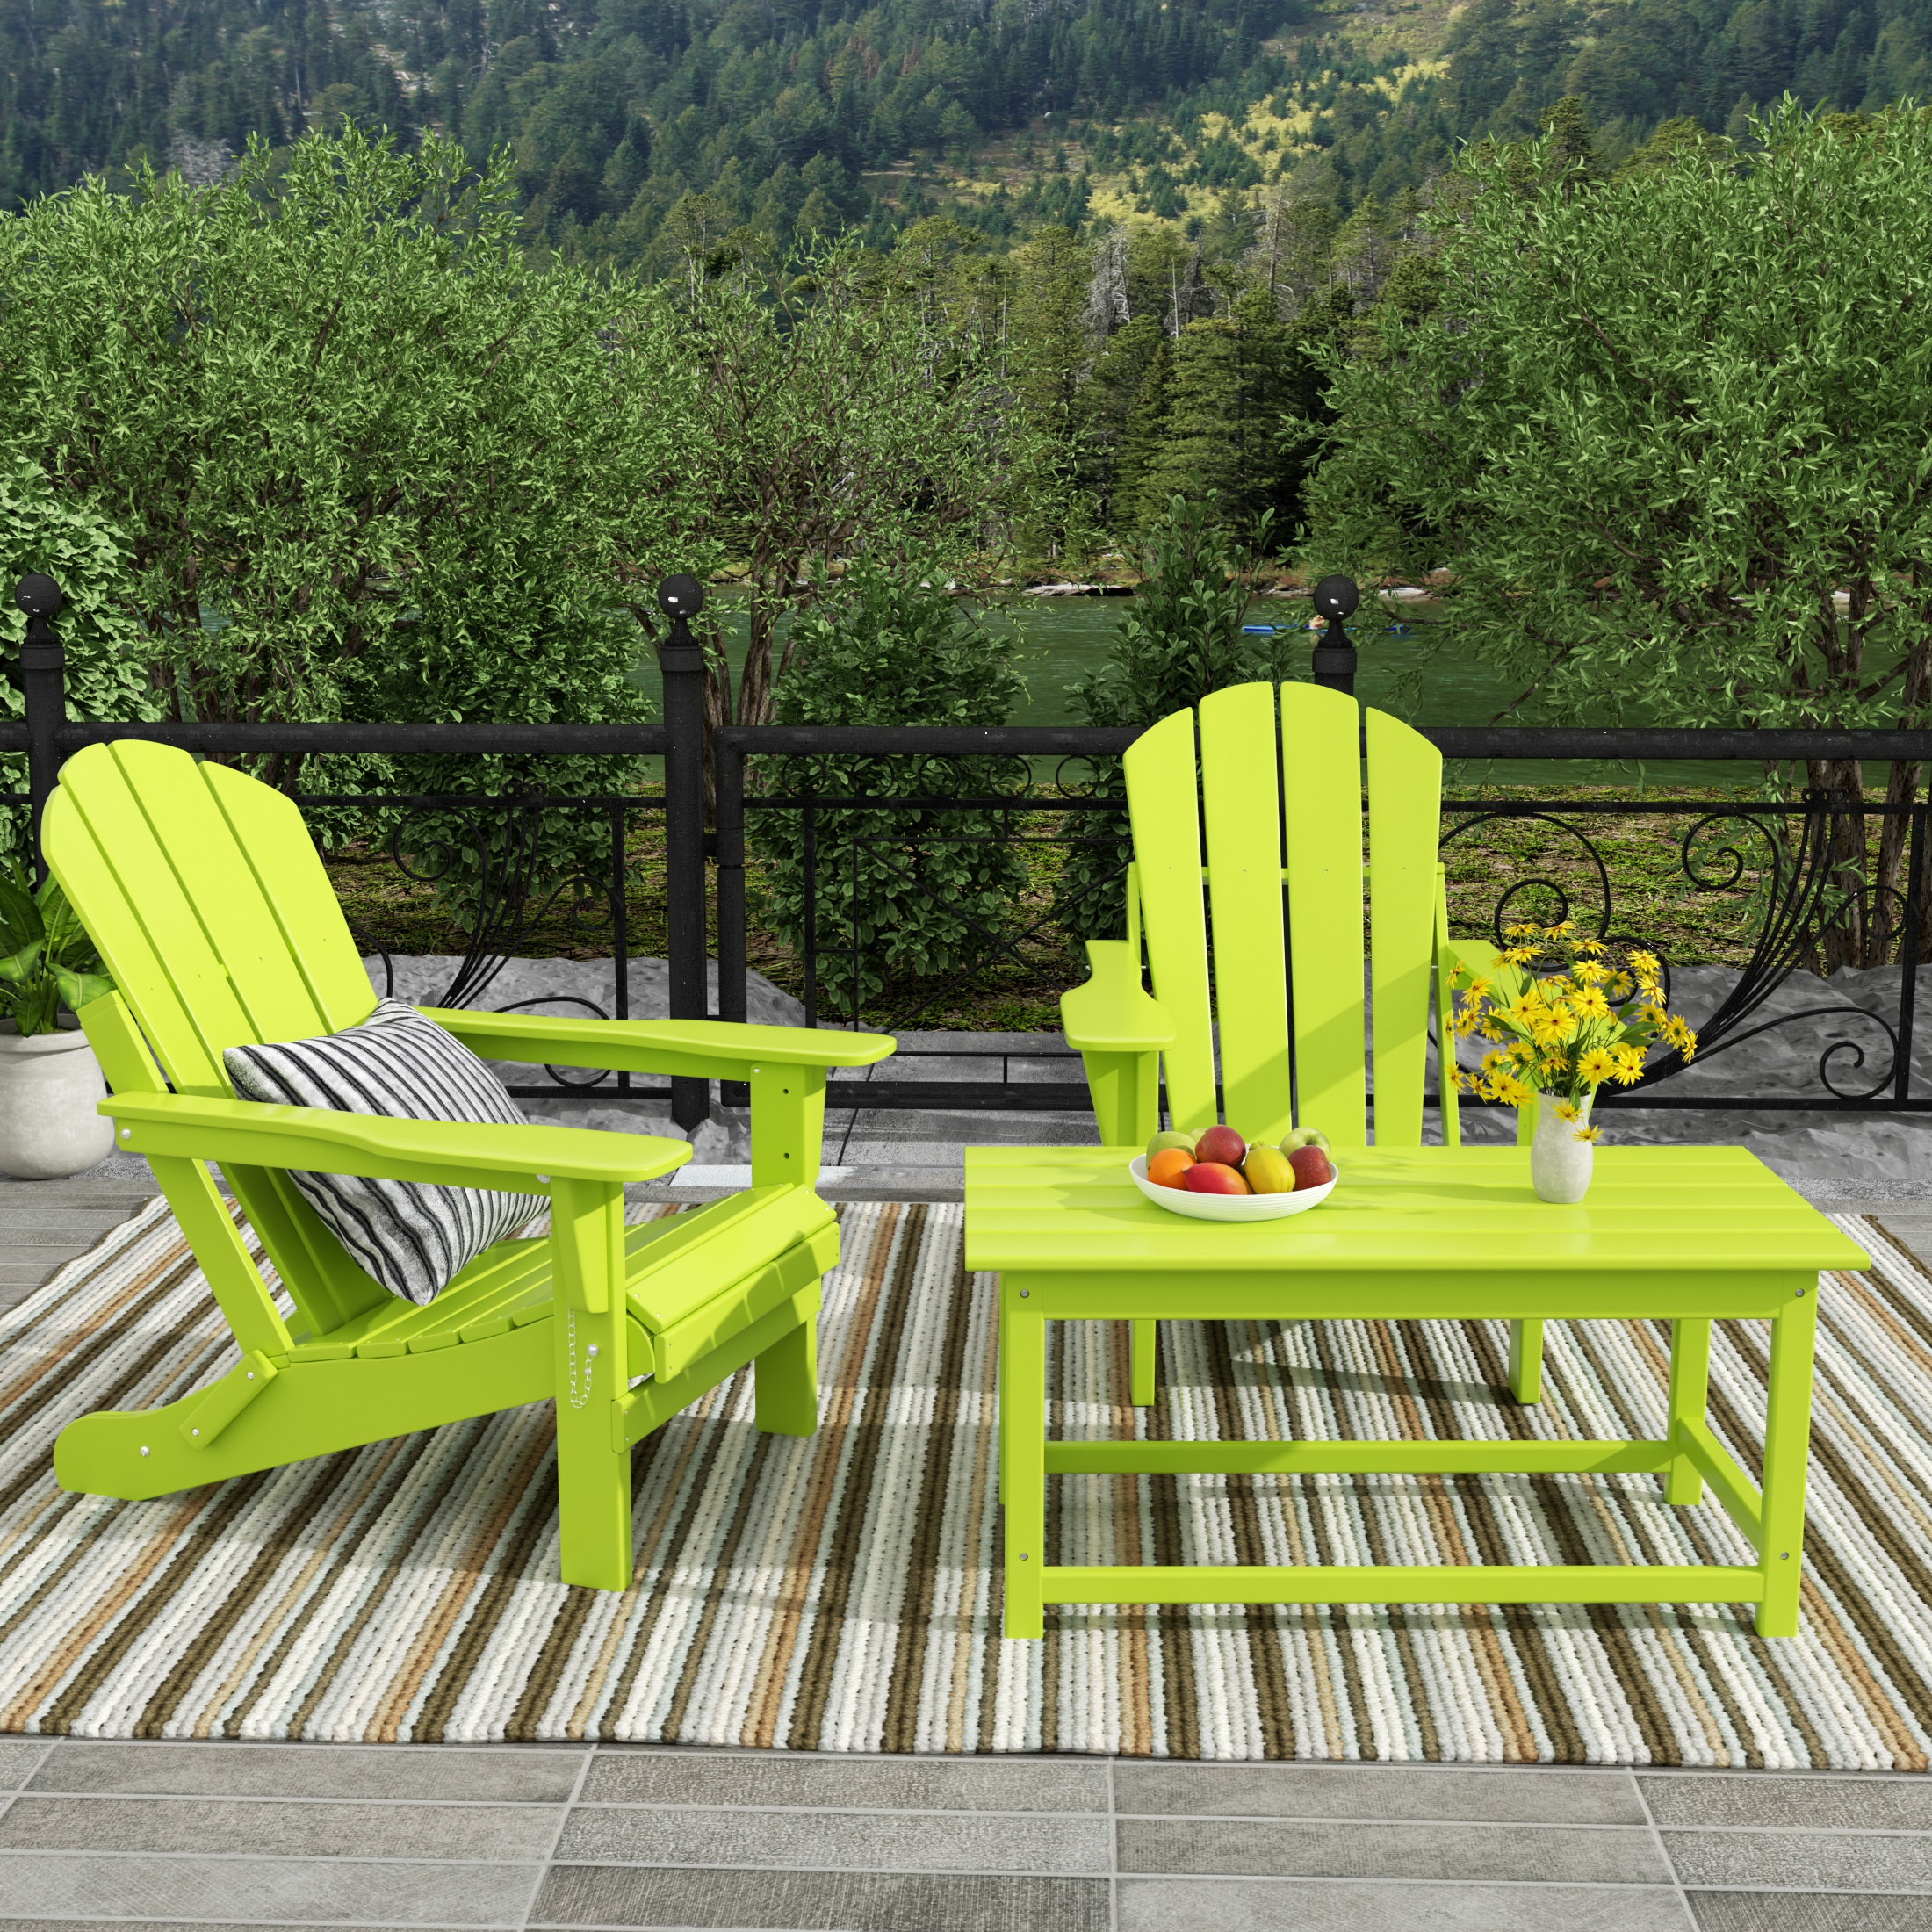 WestinTrends Malibu 3-Pieces Outdoor Patio Furniture Set, All Weather Outdoor Seating Plastic Adirondack Chair Set of 2 with Coffee Table for Porch Lawn Backyard, Lime - image 2 of 7